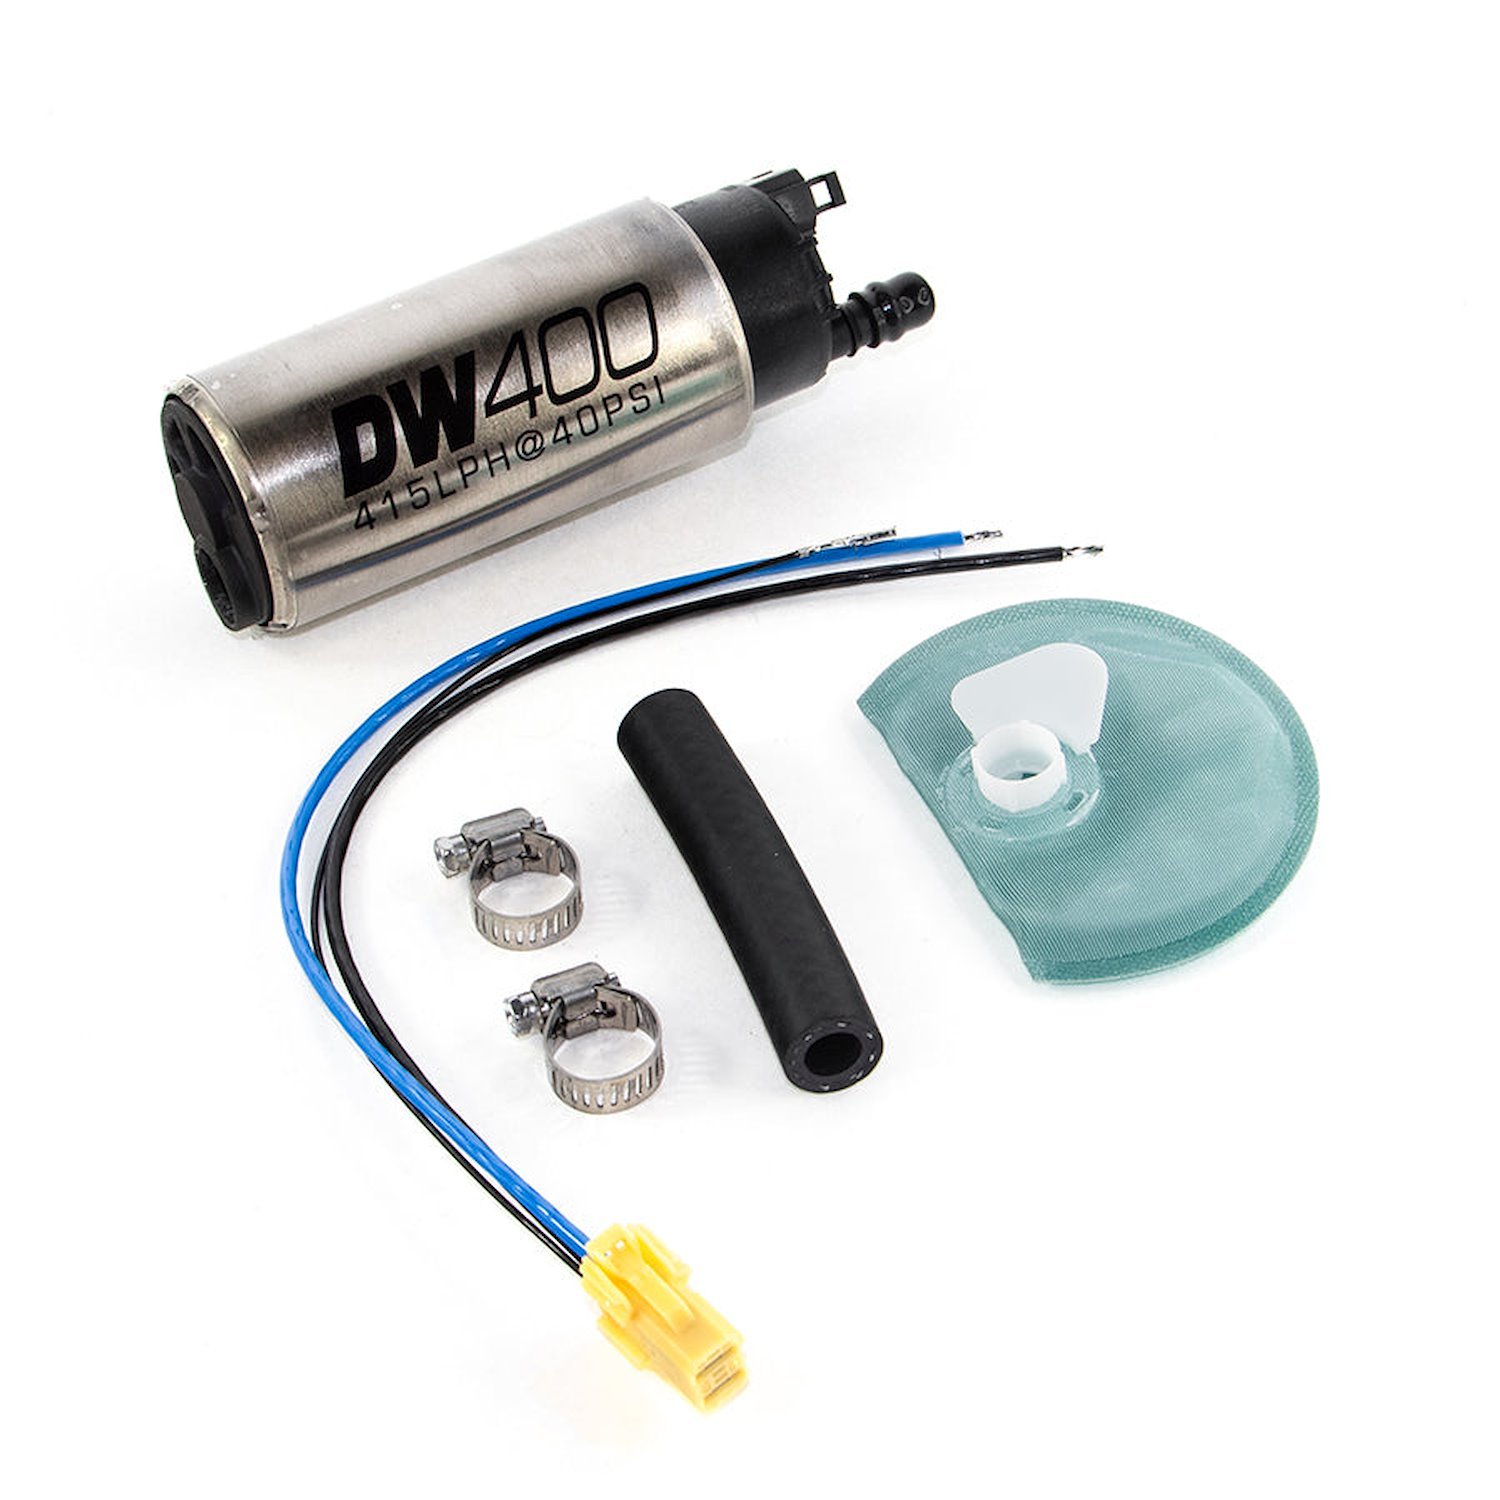 94011045 415lph in-tank fuel pump w/ 9-1045 install kit for 05-10 Ford Mustang (exc GT500)